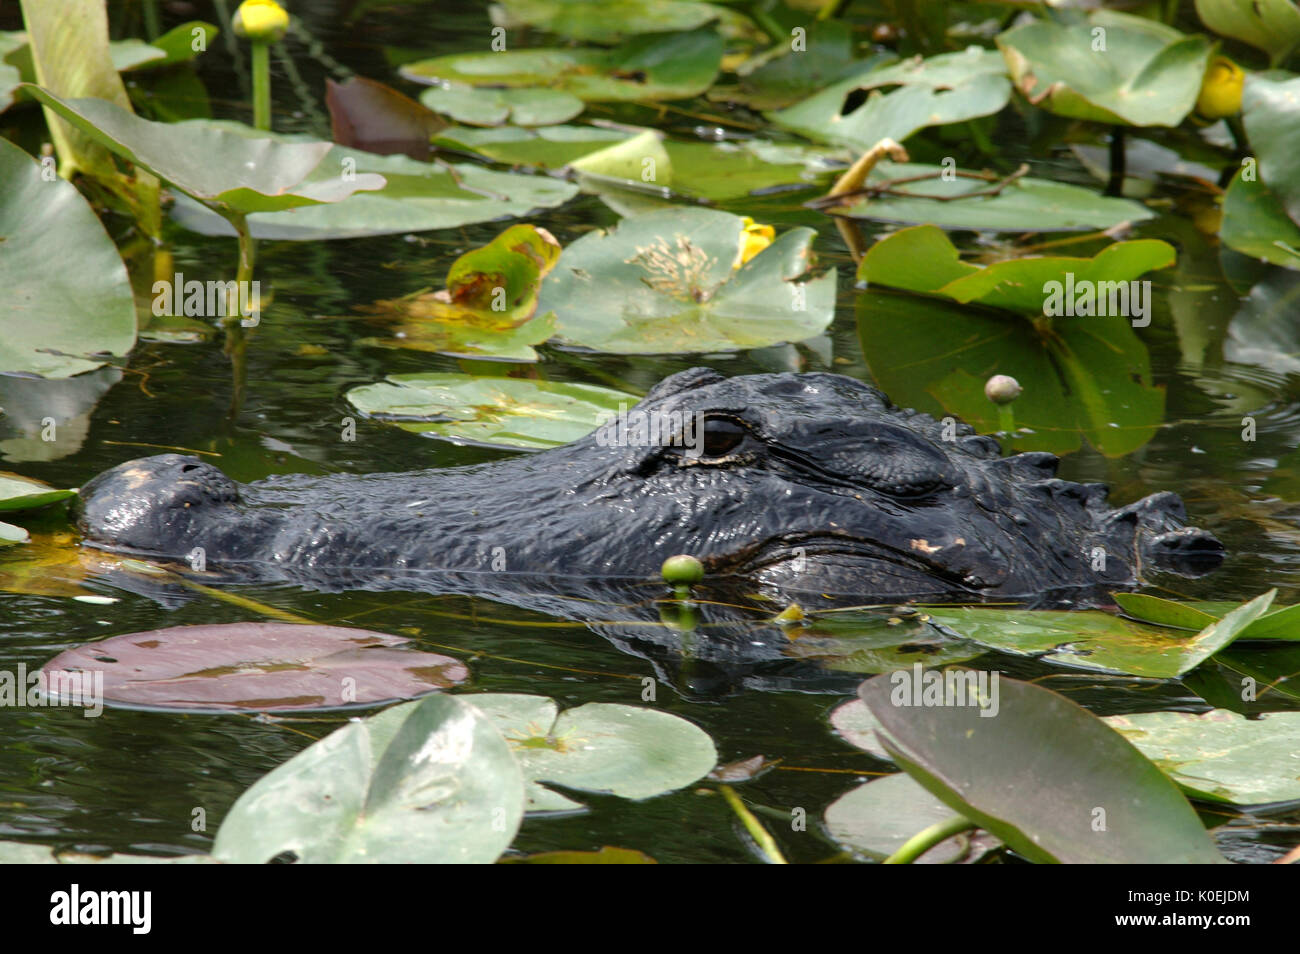 American Alligator, Alligator mississippiensis, in water amongst lily pads, Everglades National Park, predator Stock Photo